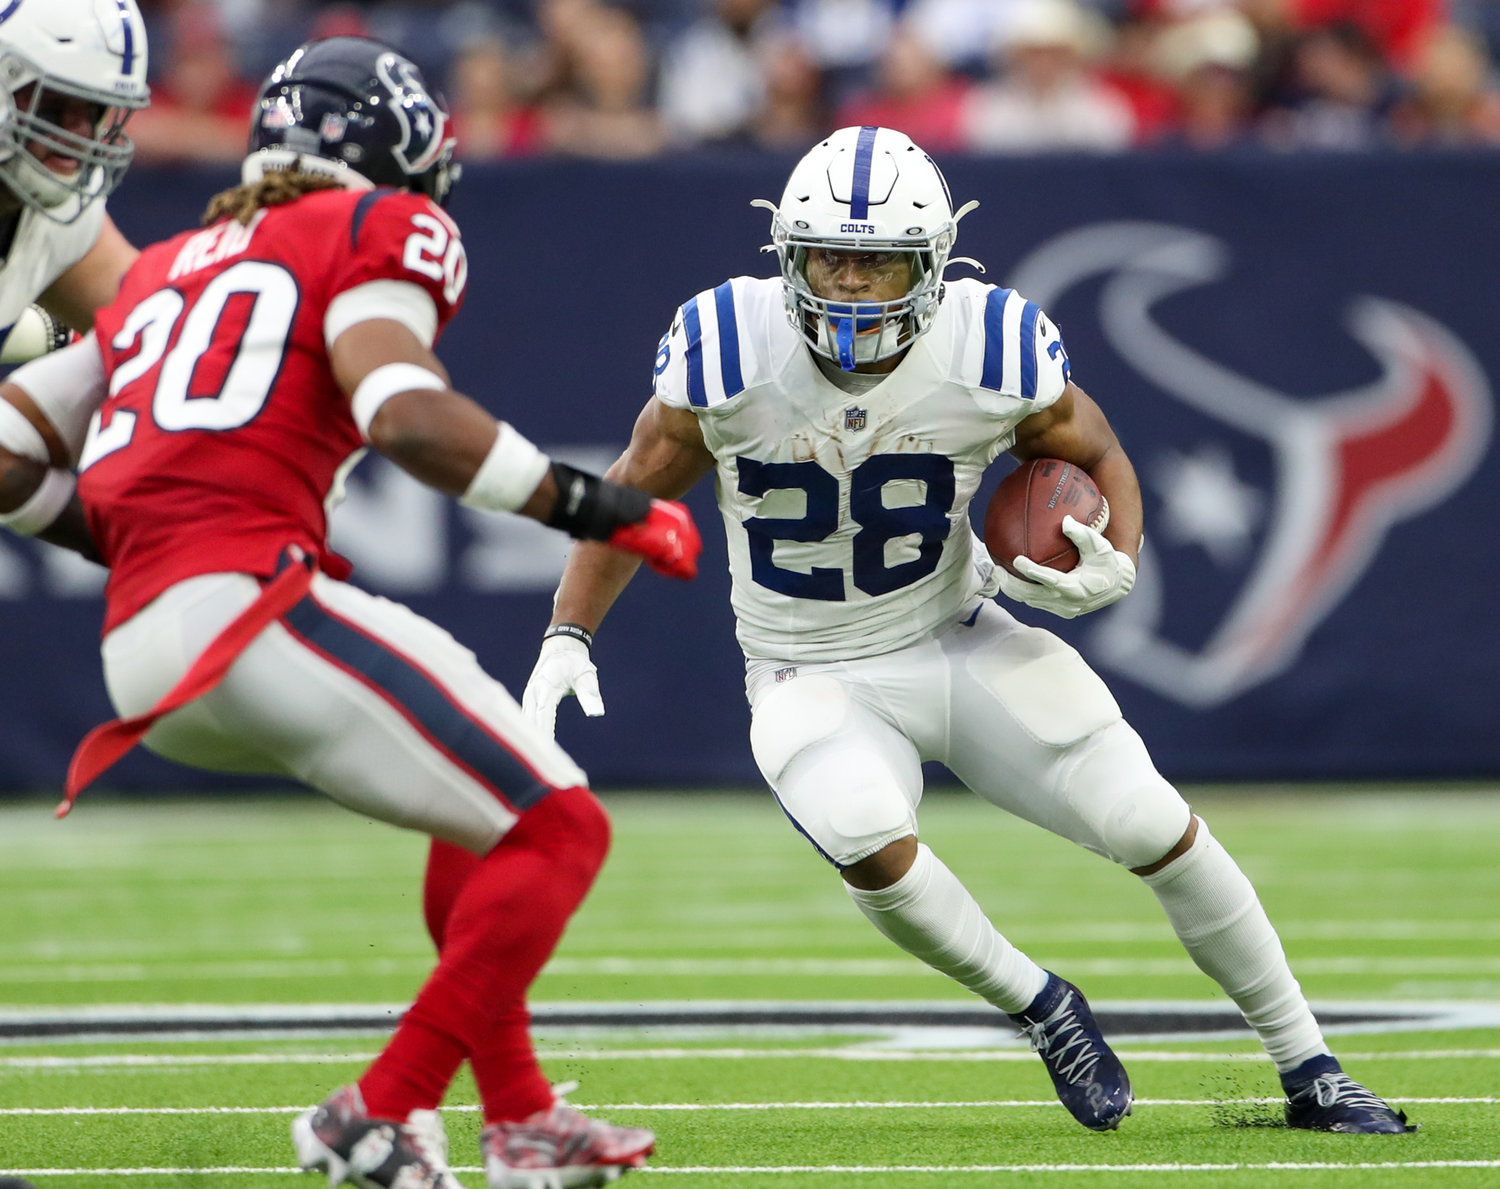 Indianapolis Colts running back Jonathan Taylor (28) carries the ball during an NFL game between the Texans and the Colts on December 5, 2021 in Houston, Texas.